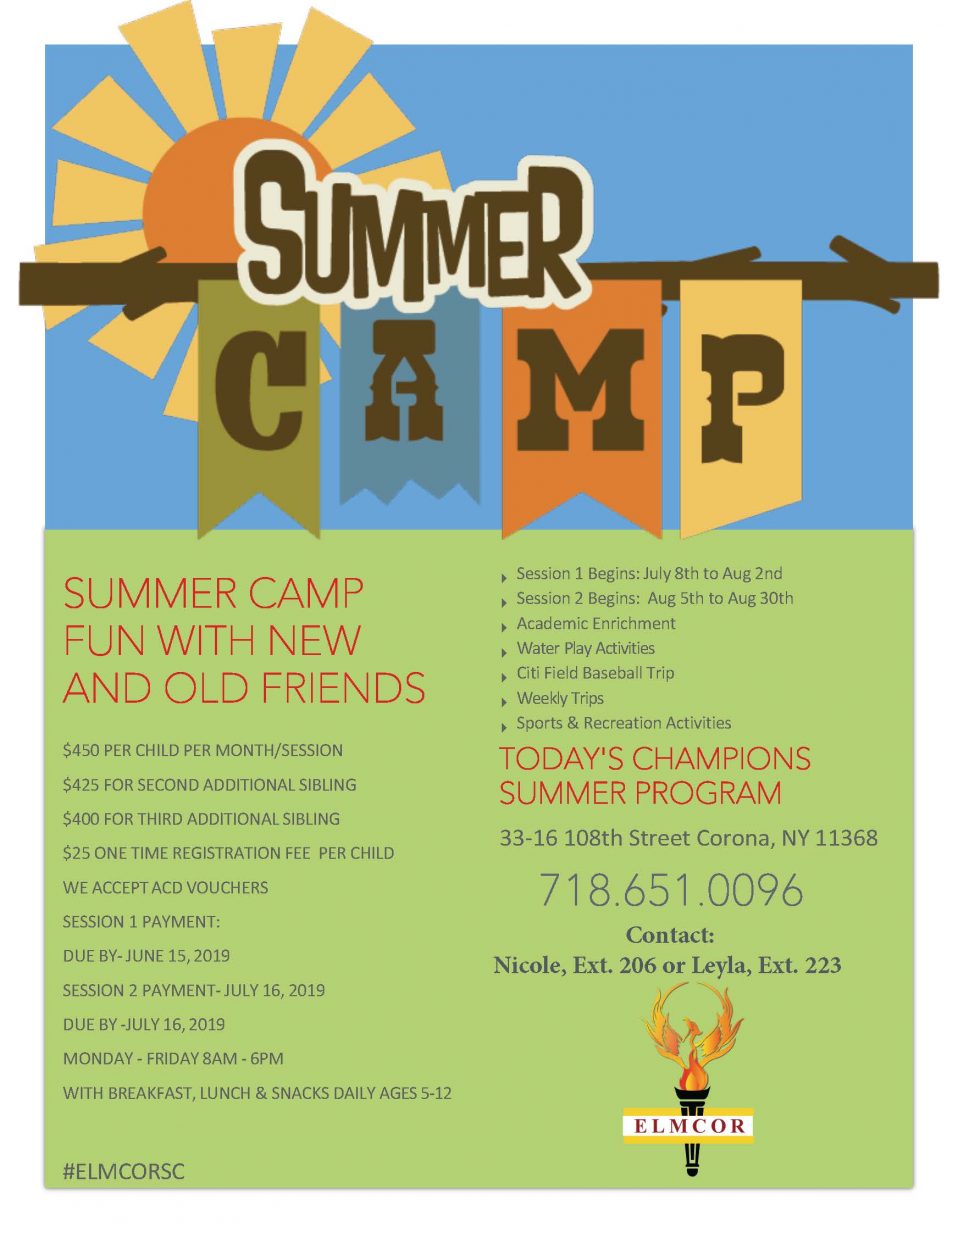 Events – Elmcor Youth and Adult Activity, Inc.